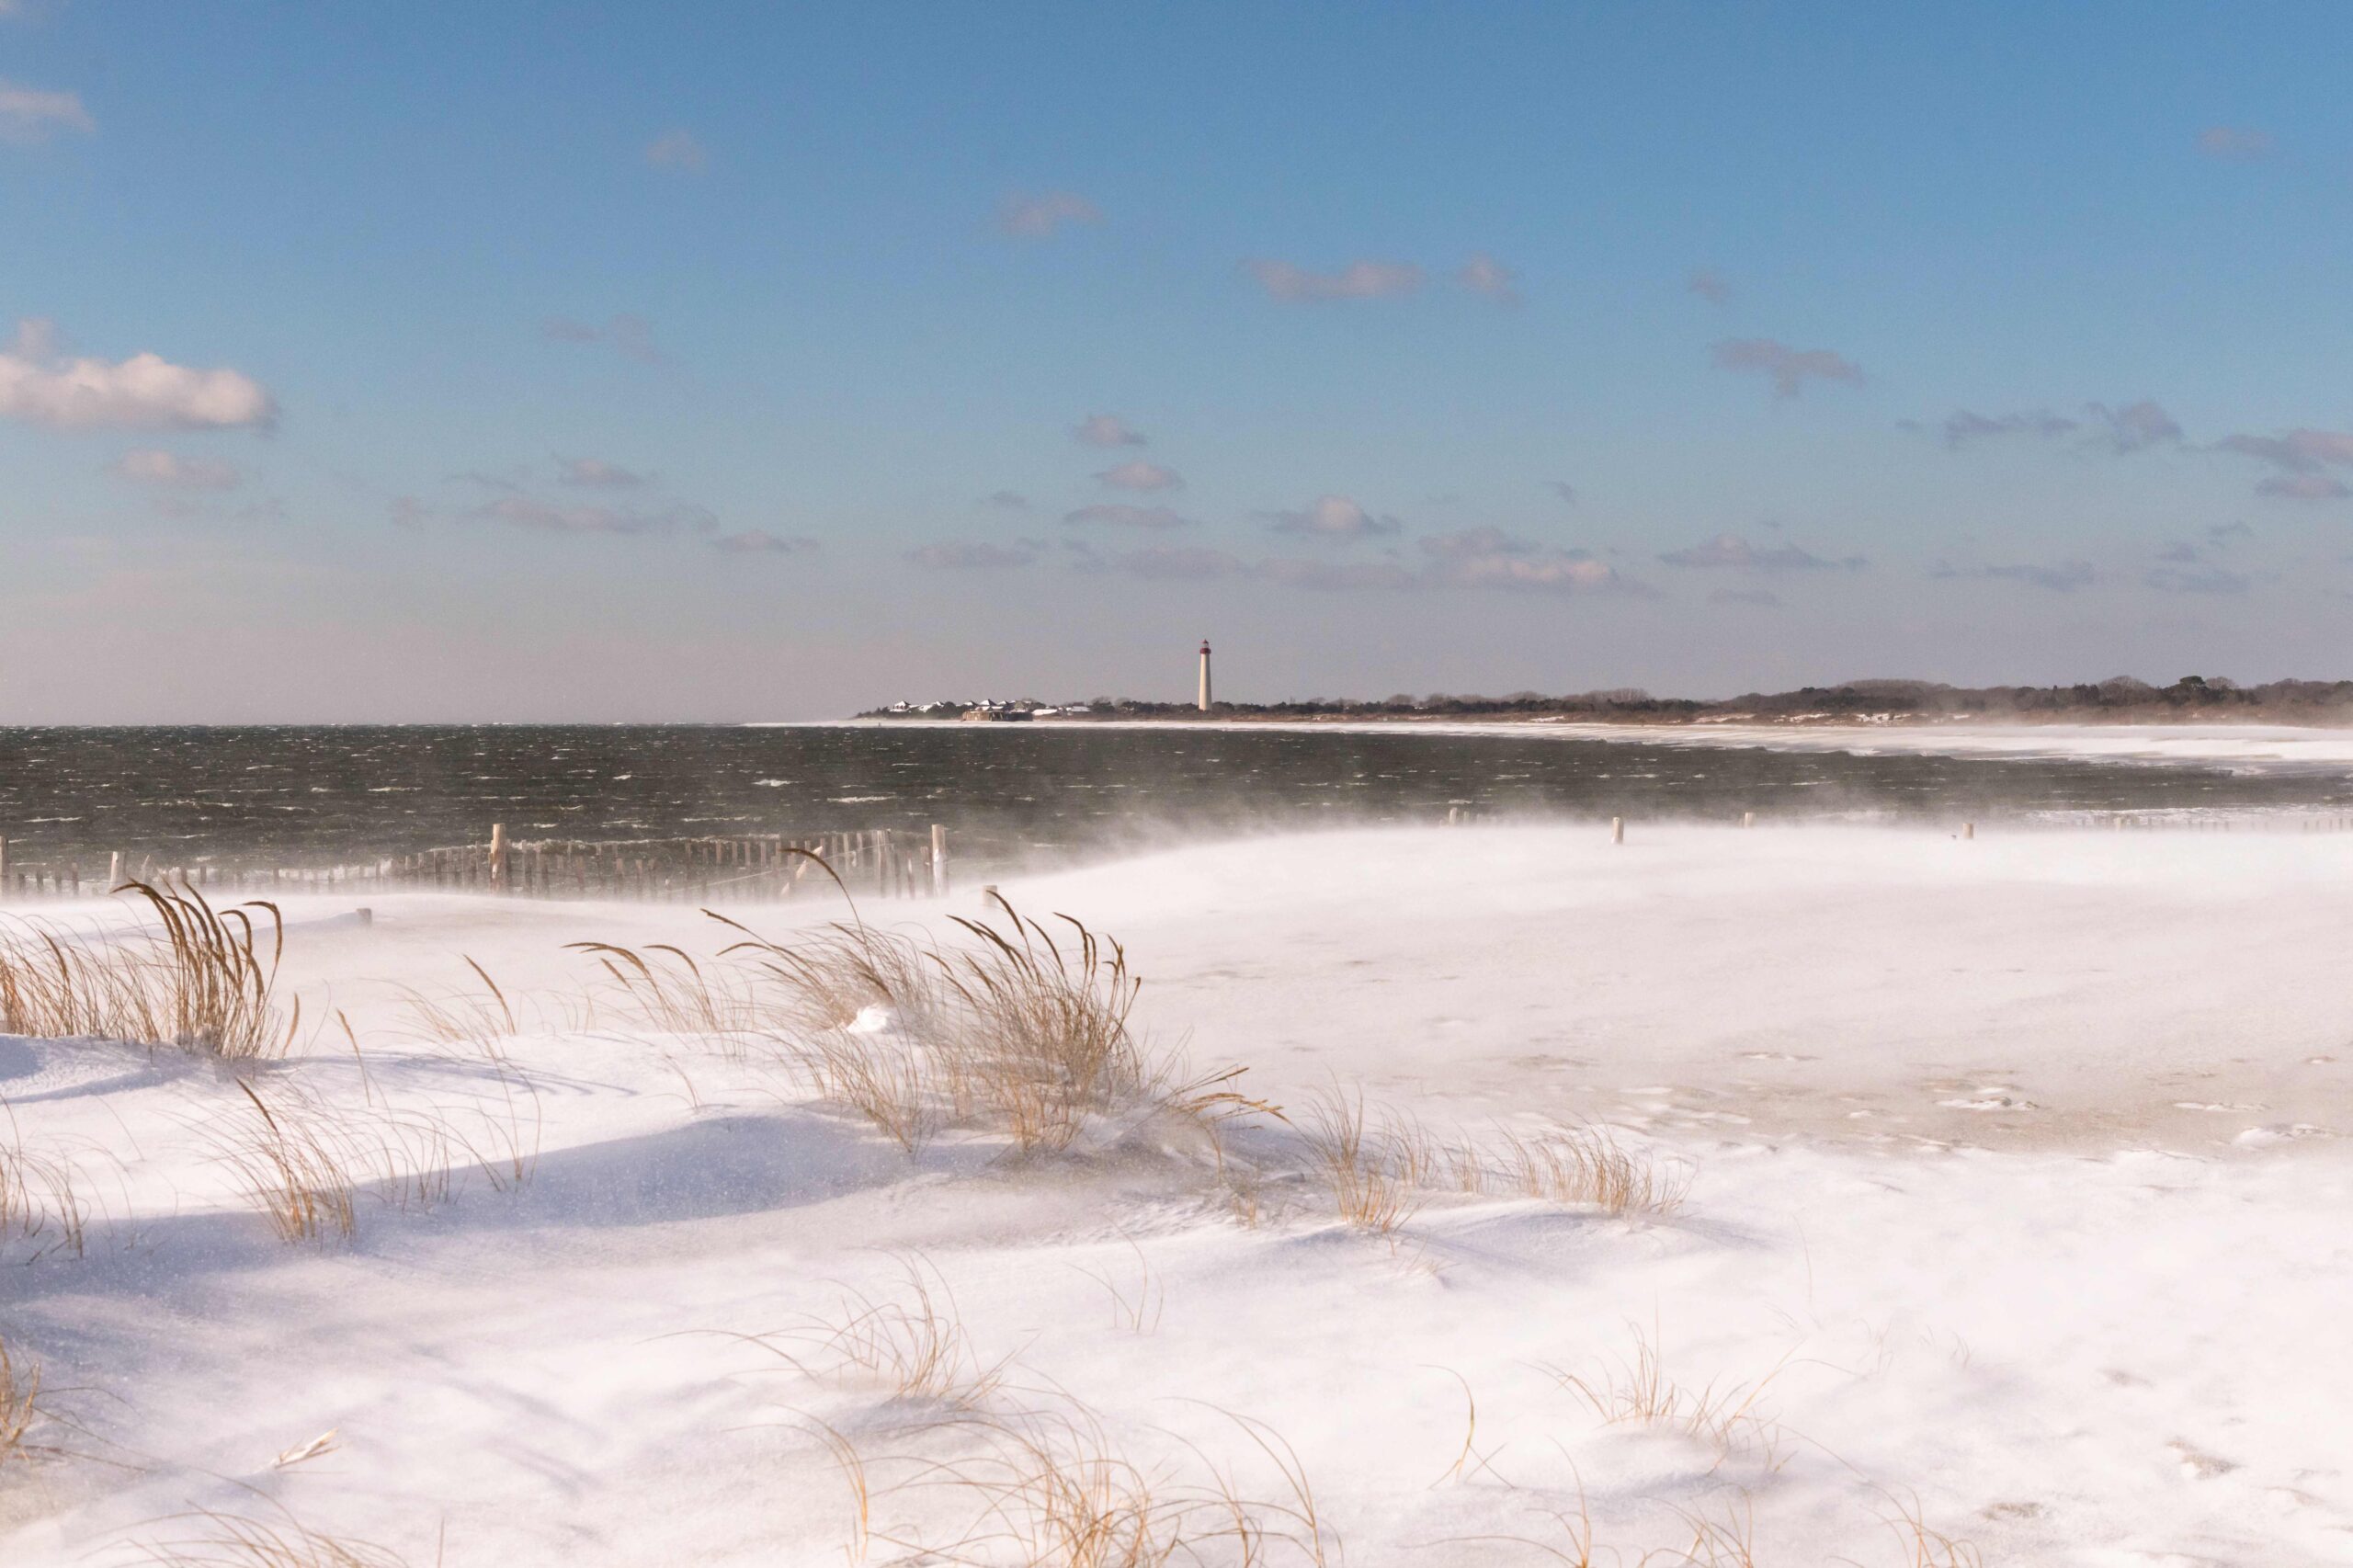 Snow blowing across the sand and dunes with the lighthouse and the choppy ocean in the background